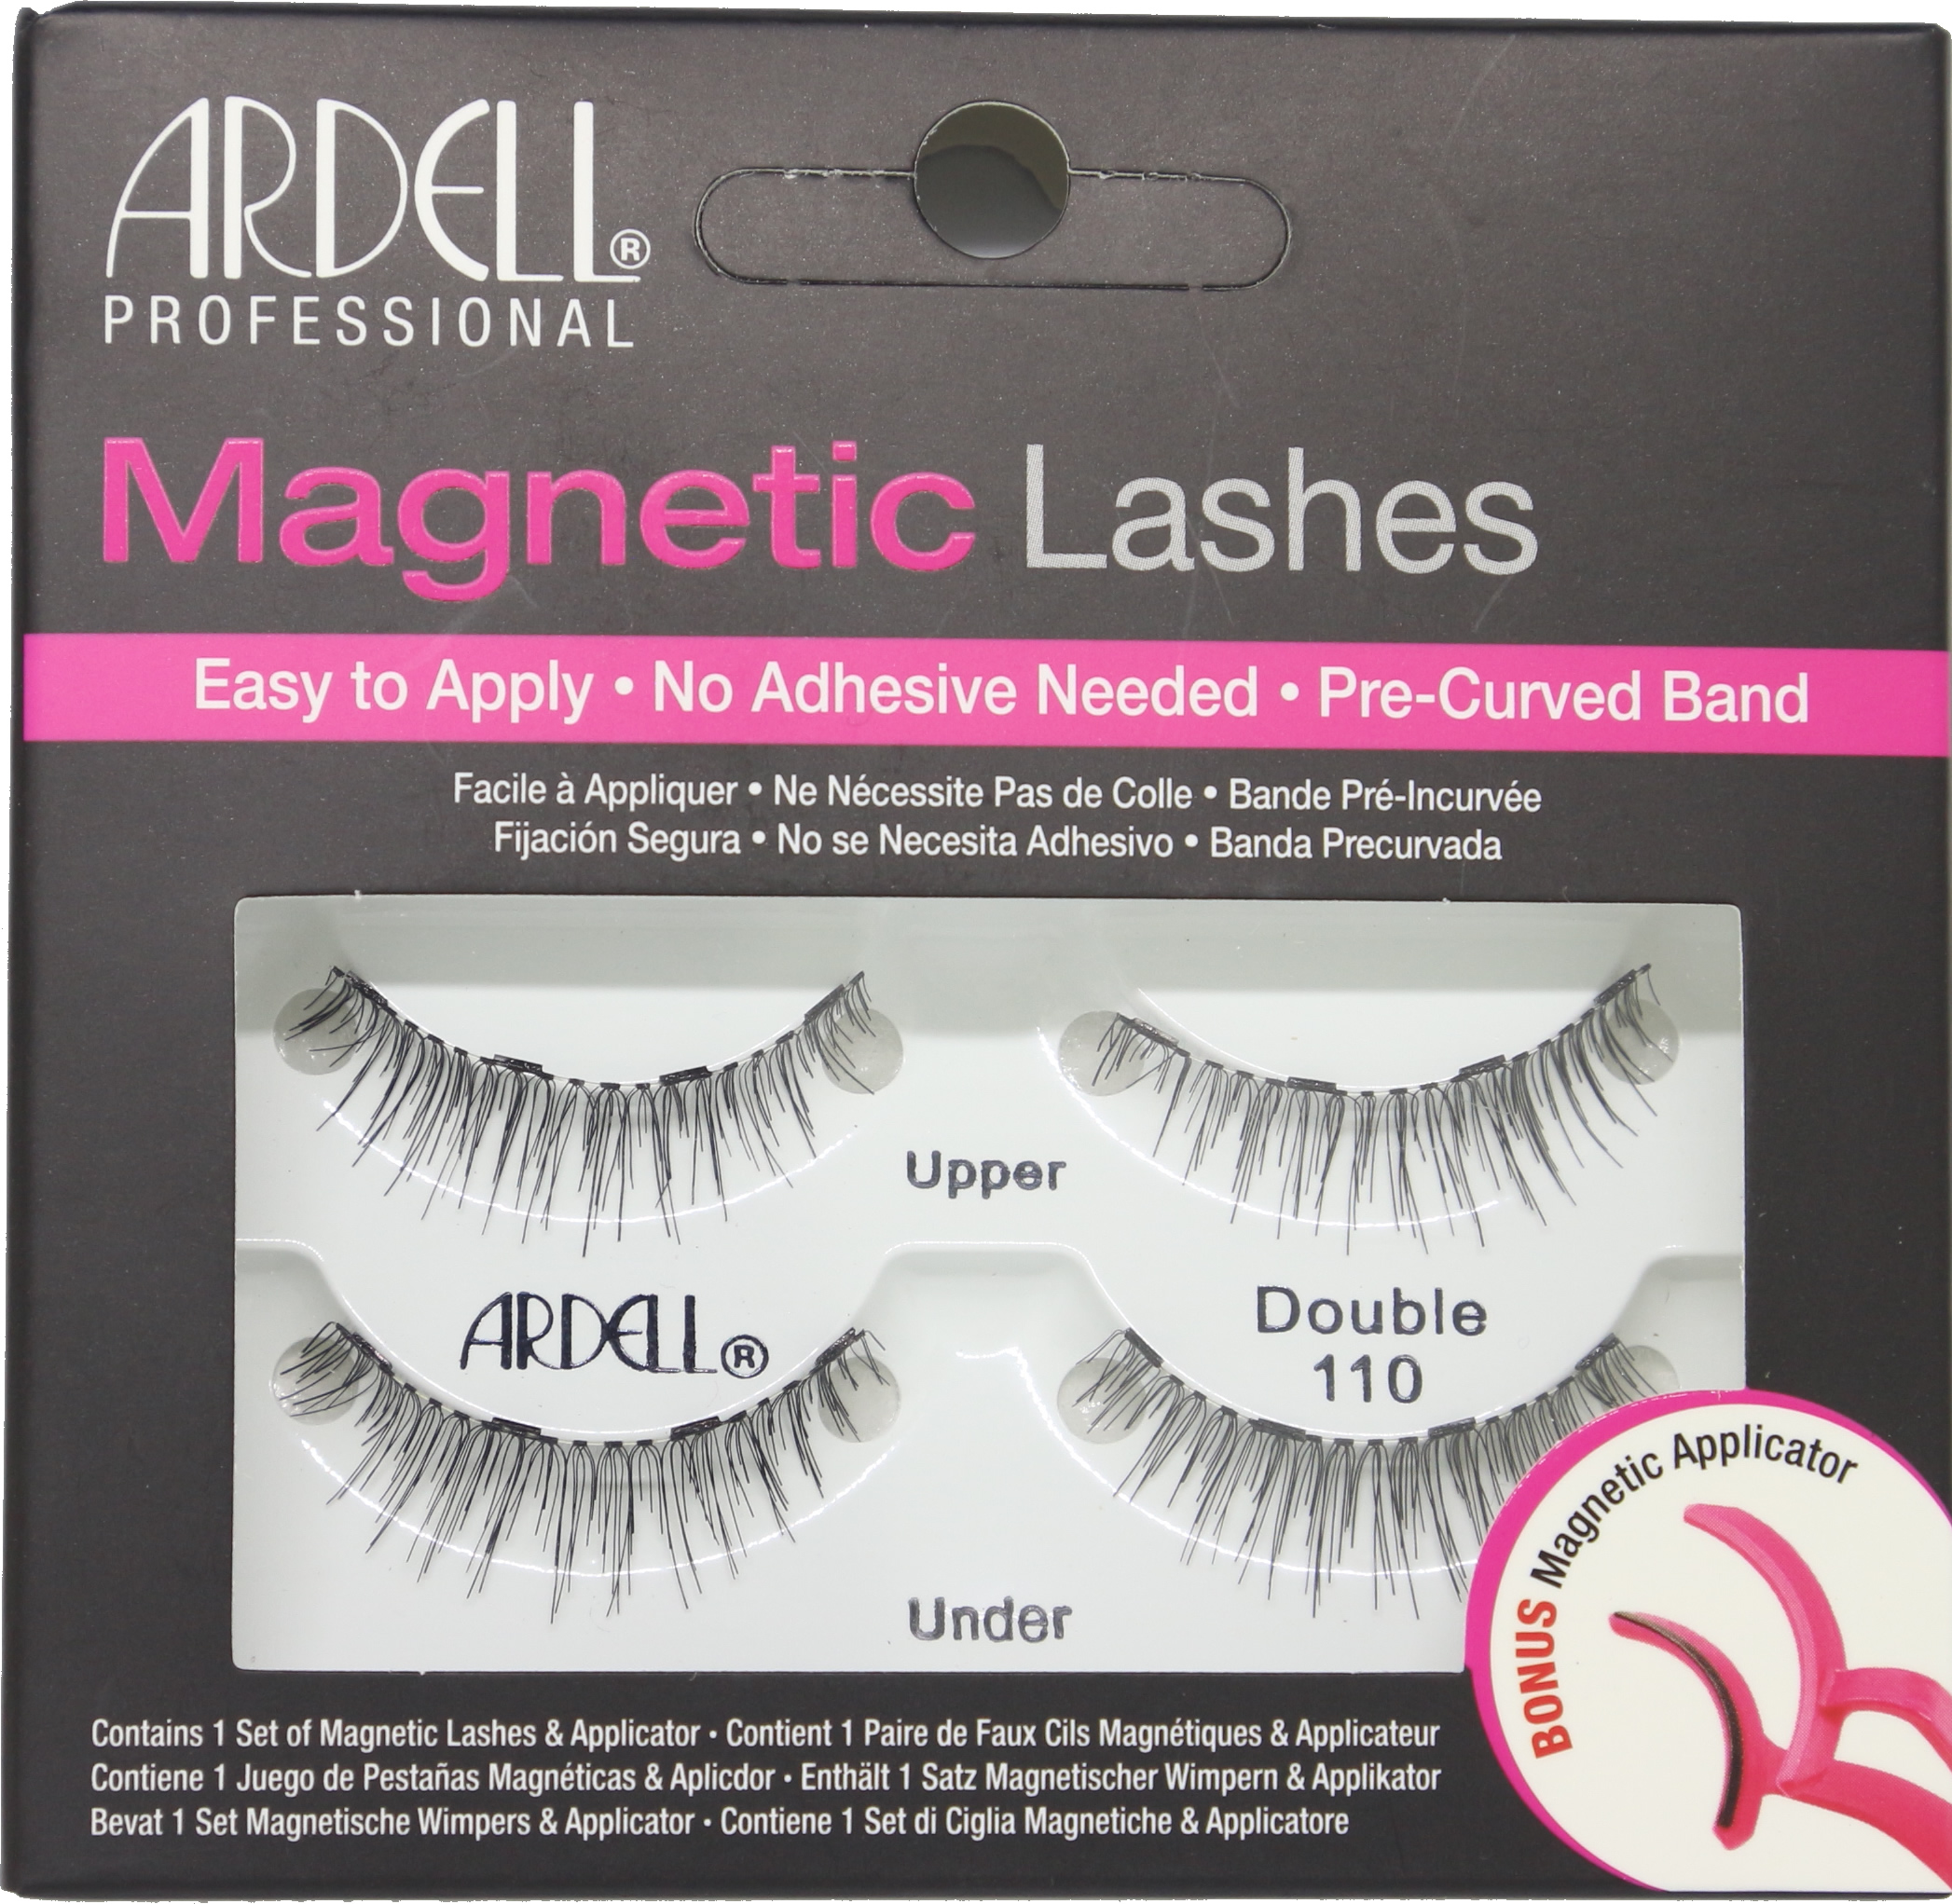 Ardell Lash Double #110, Ardell Magnetic Lashes Madame Madeline Lashes